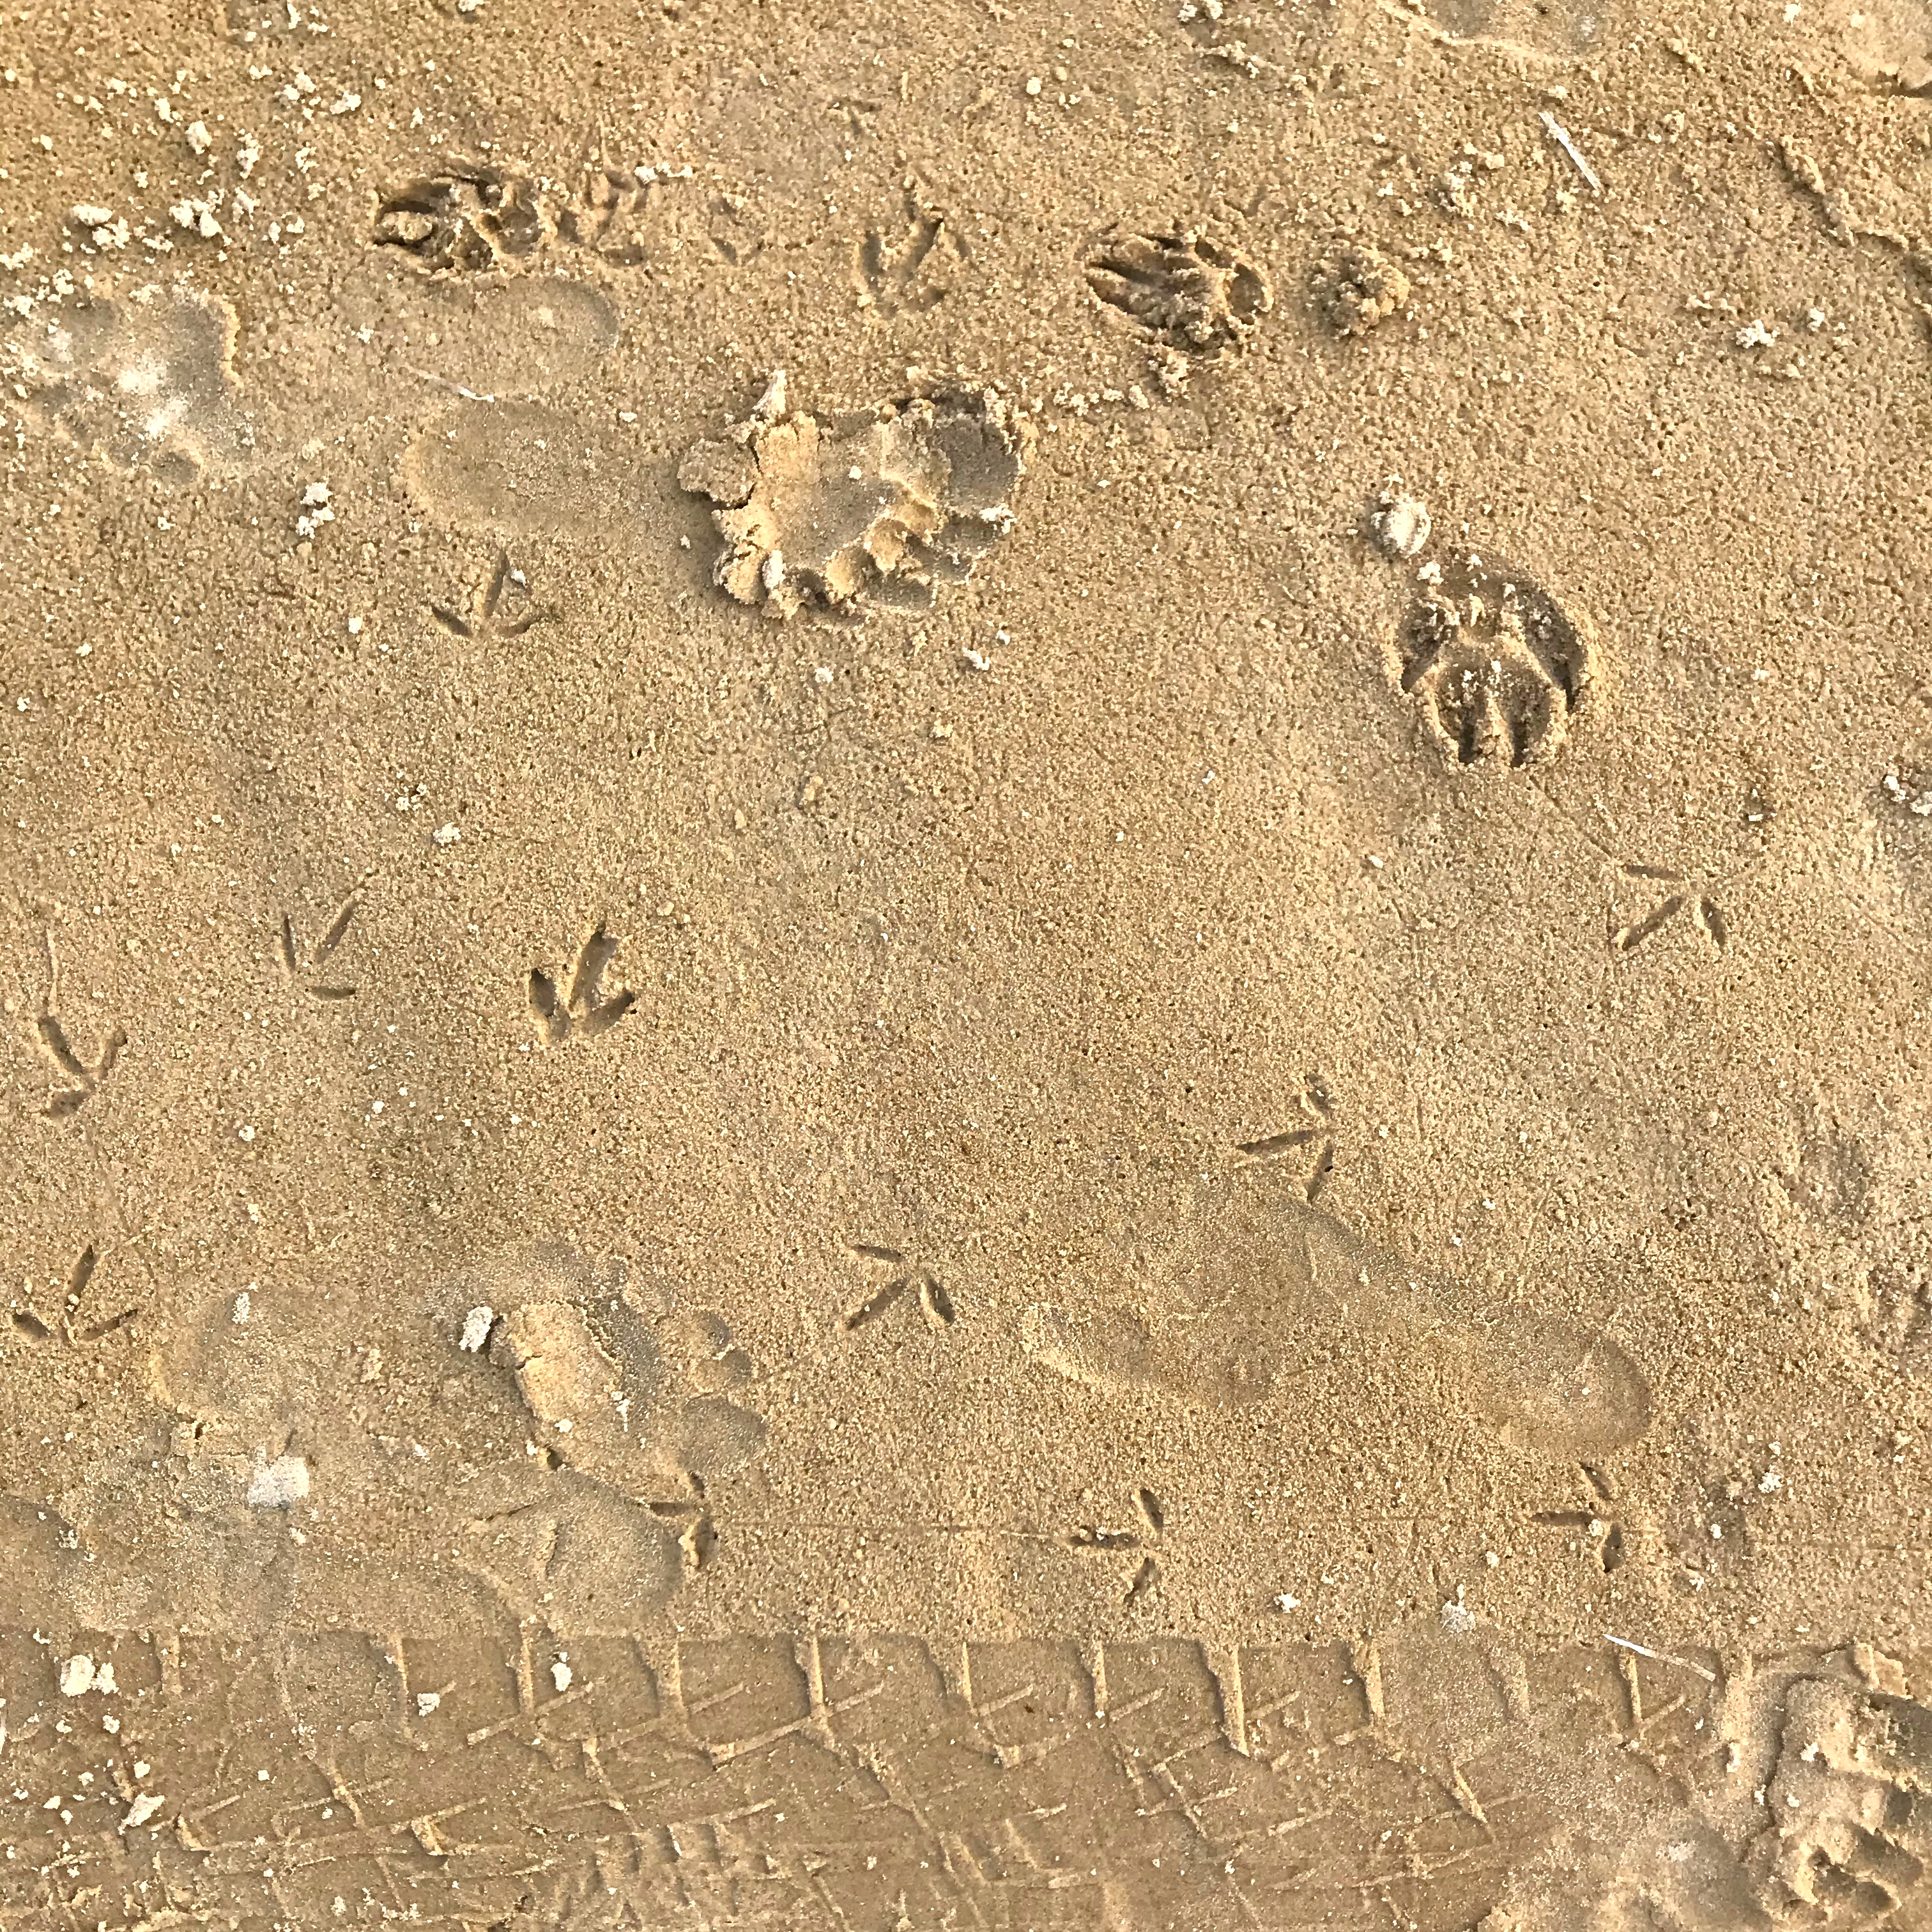 Prints in the sand left by birds, dogs, humans and cars